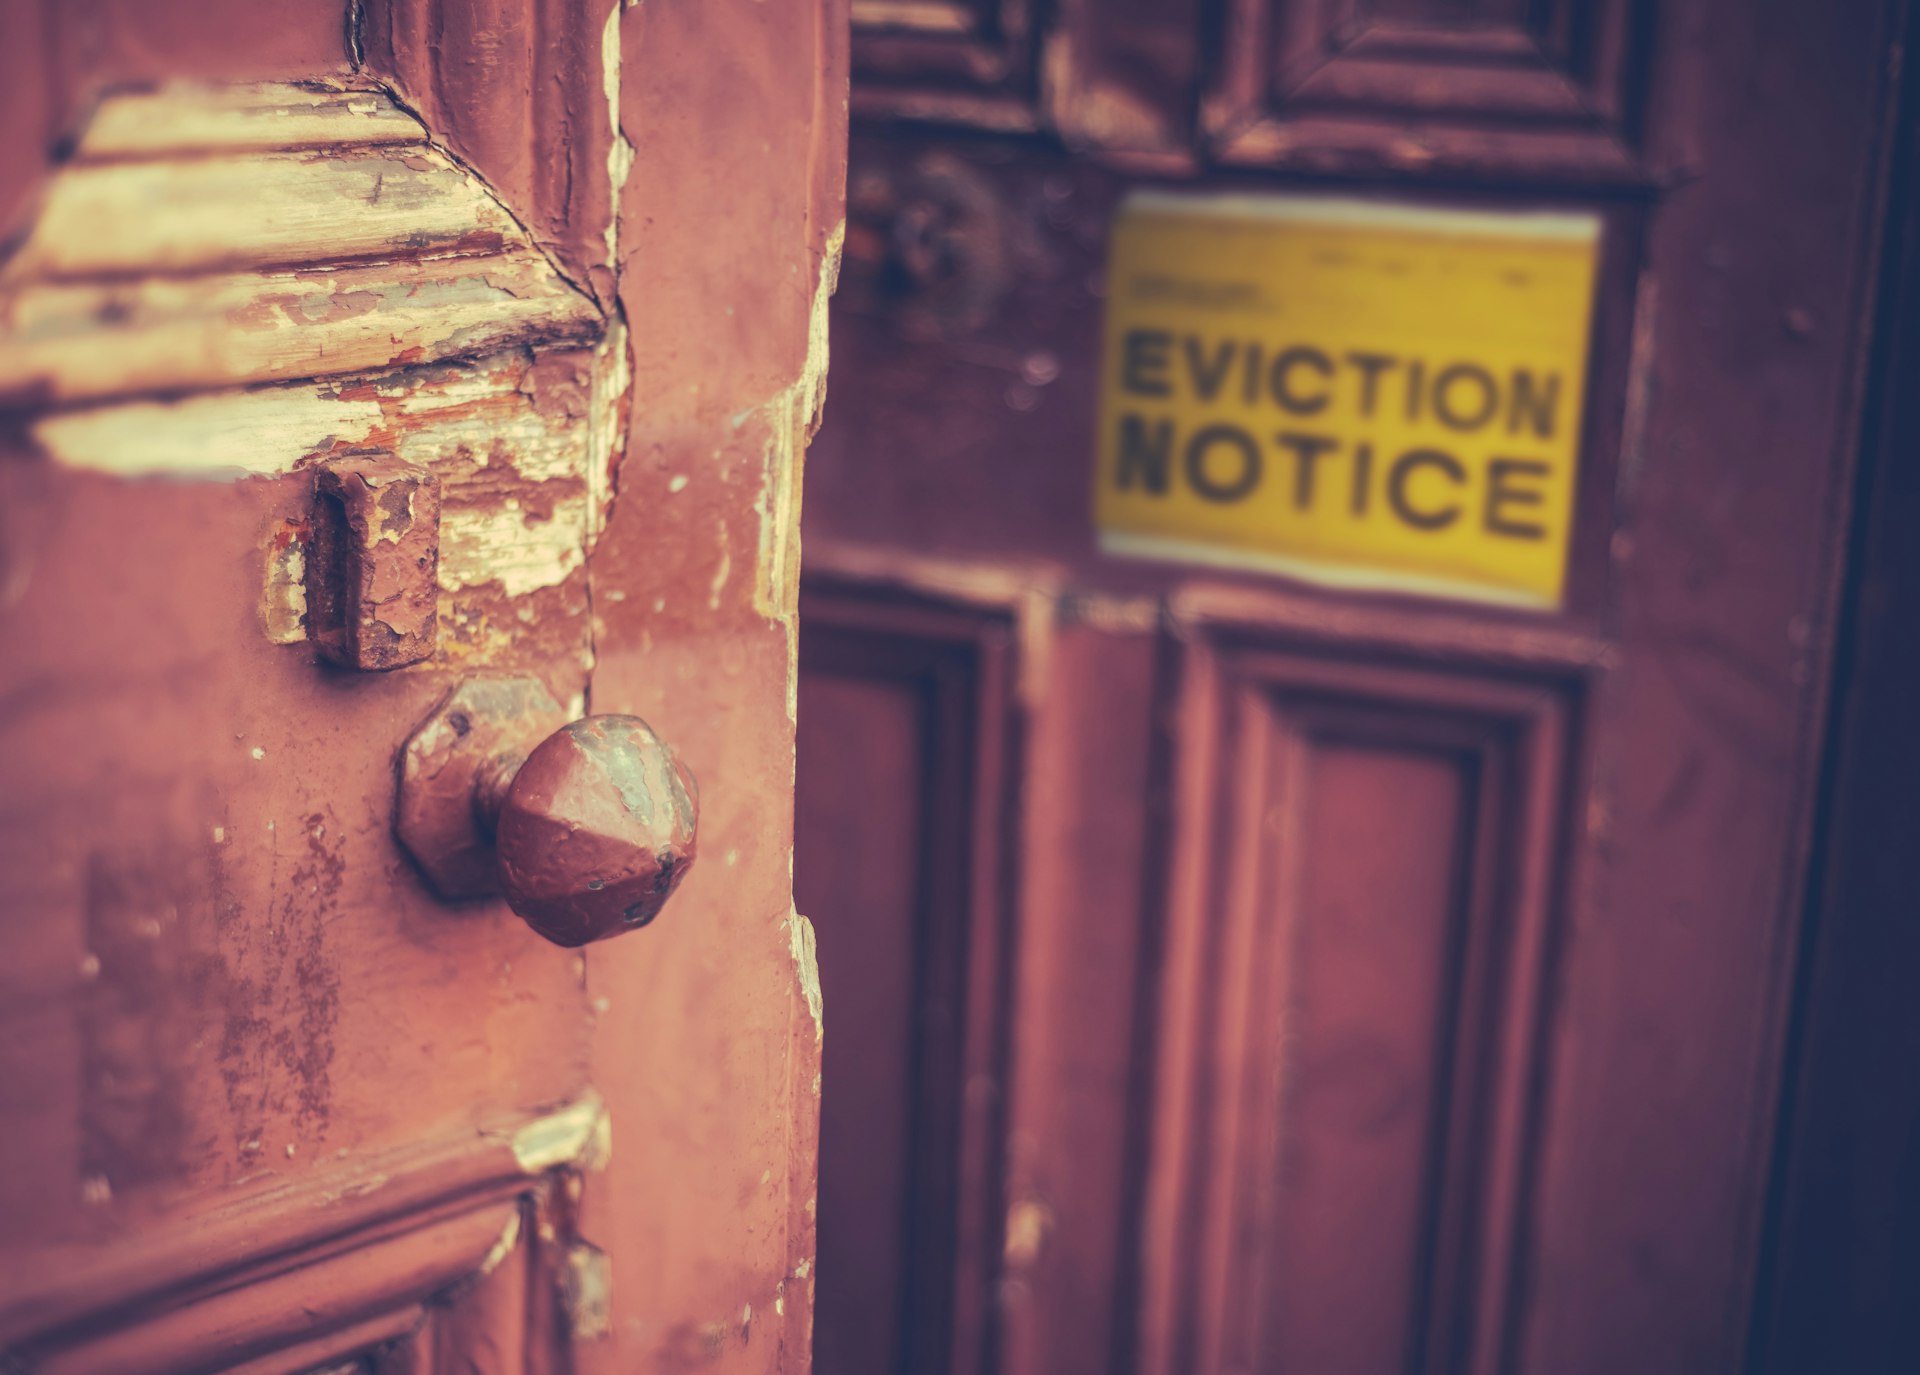 How to evict your landlord